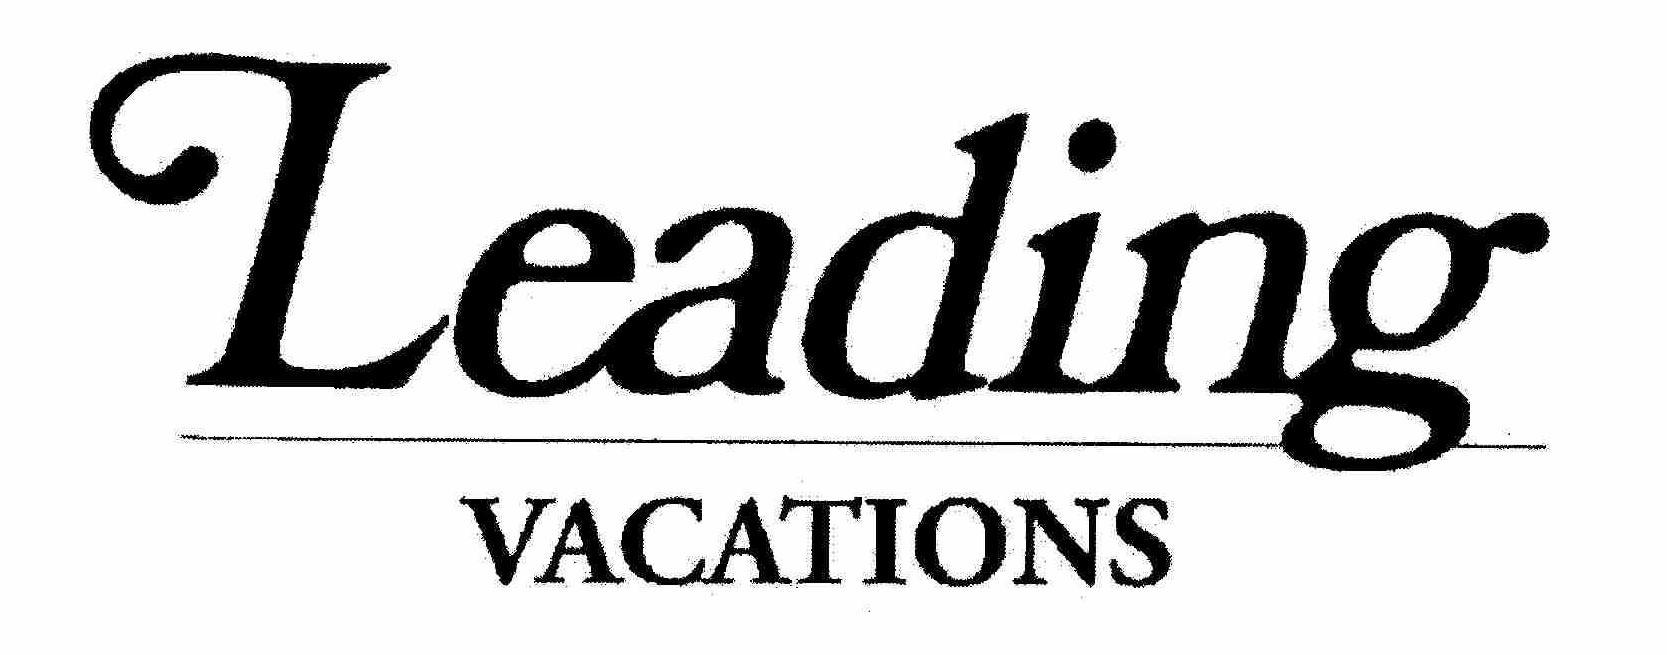  LEADING VACATIONS